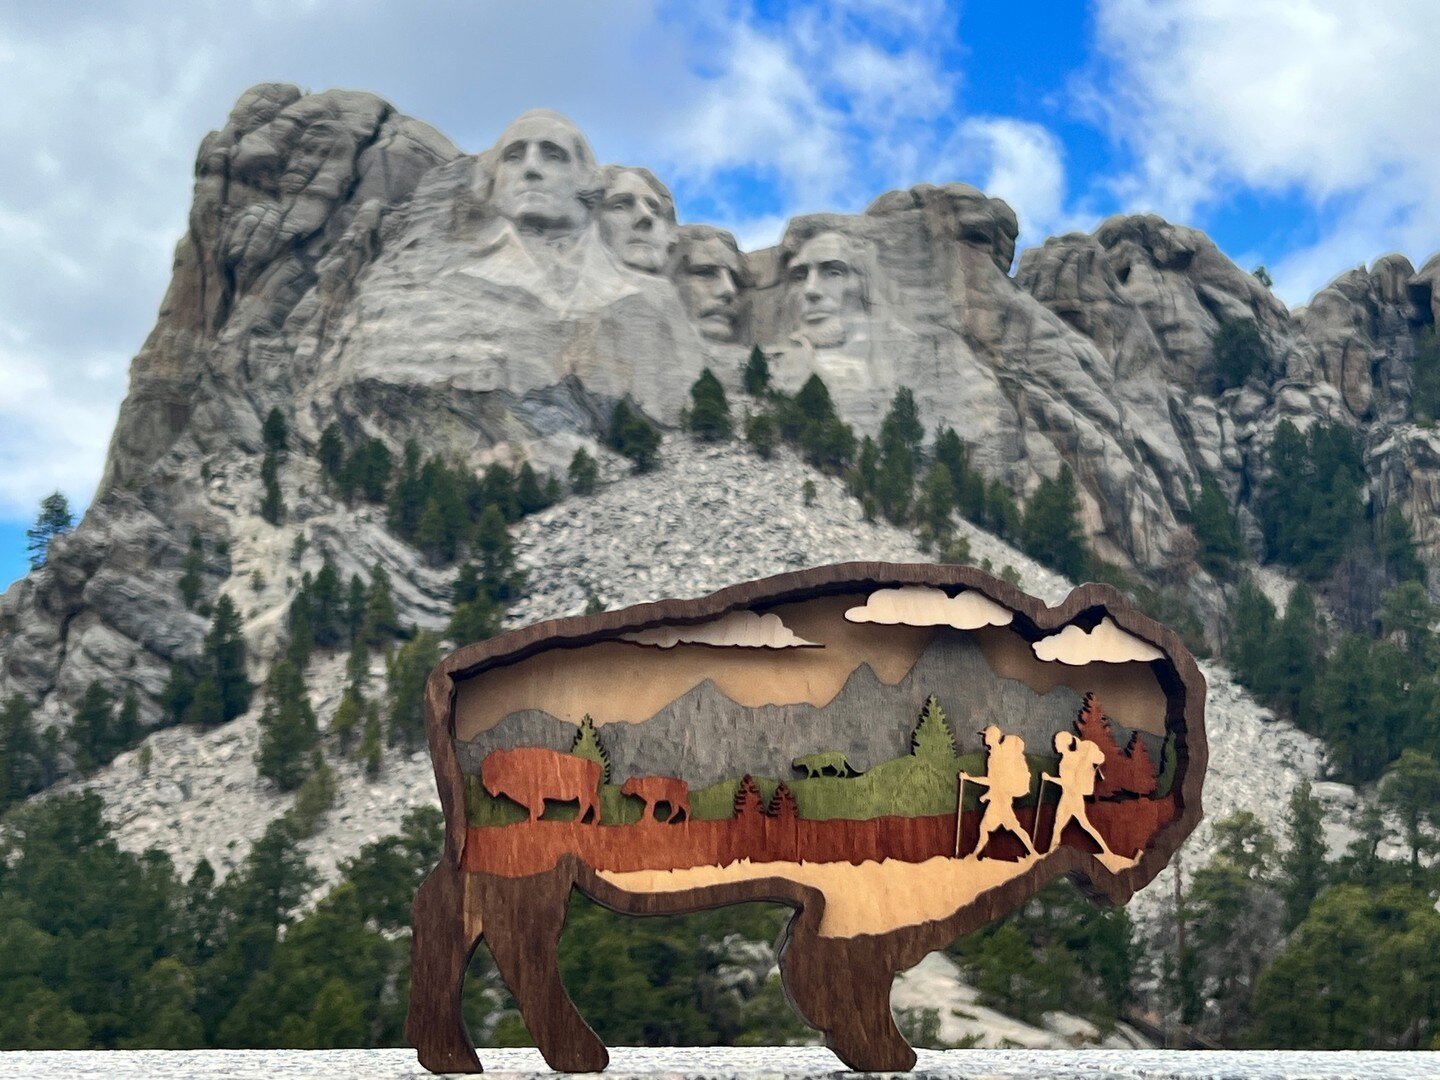 In a place where history and nature come together in such a profound way, it only seems fitting to bring along a piece of our own art 🎨🌅 Our 3D multi-layered bison represents the beauty and wonder of the American West.